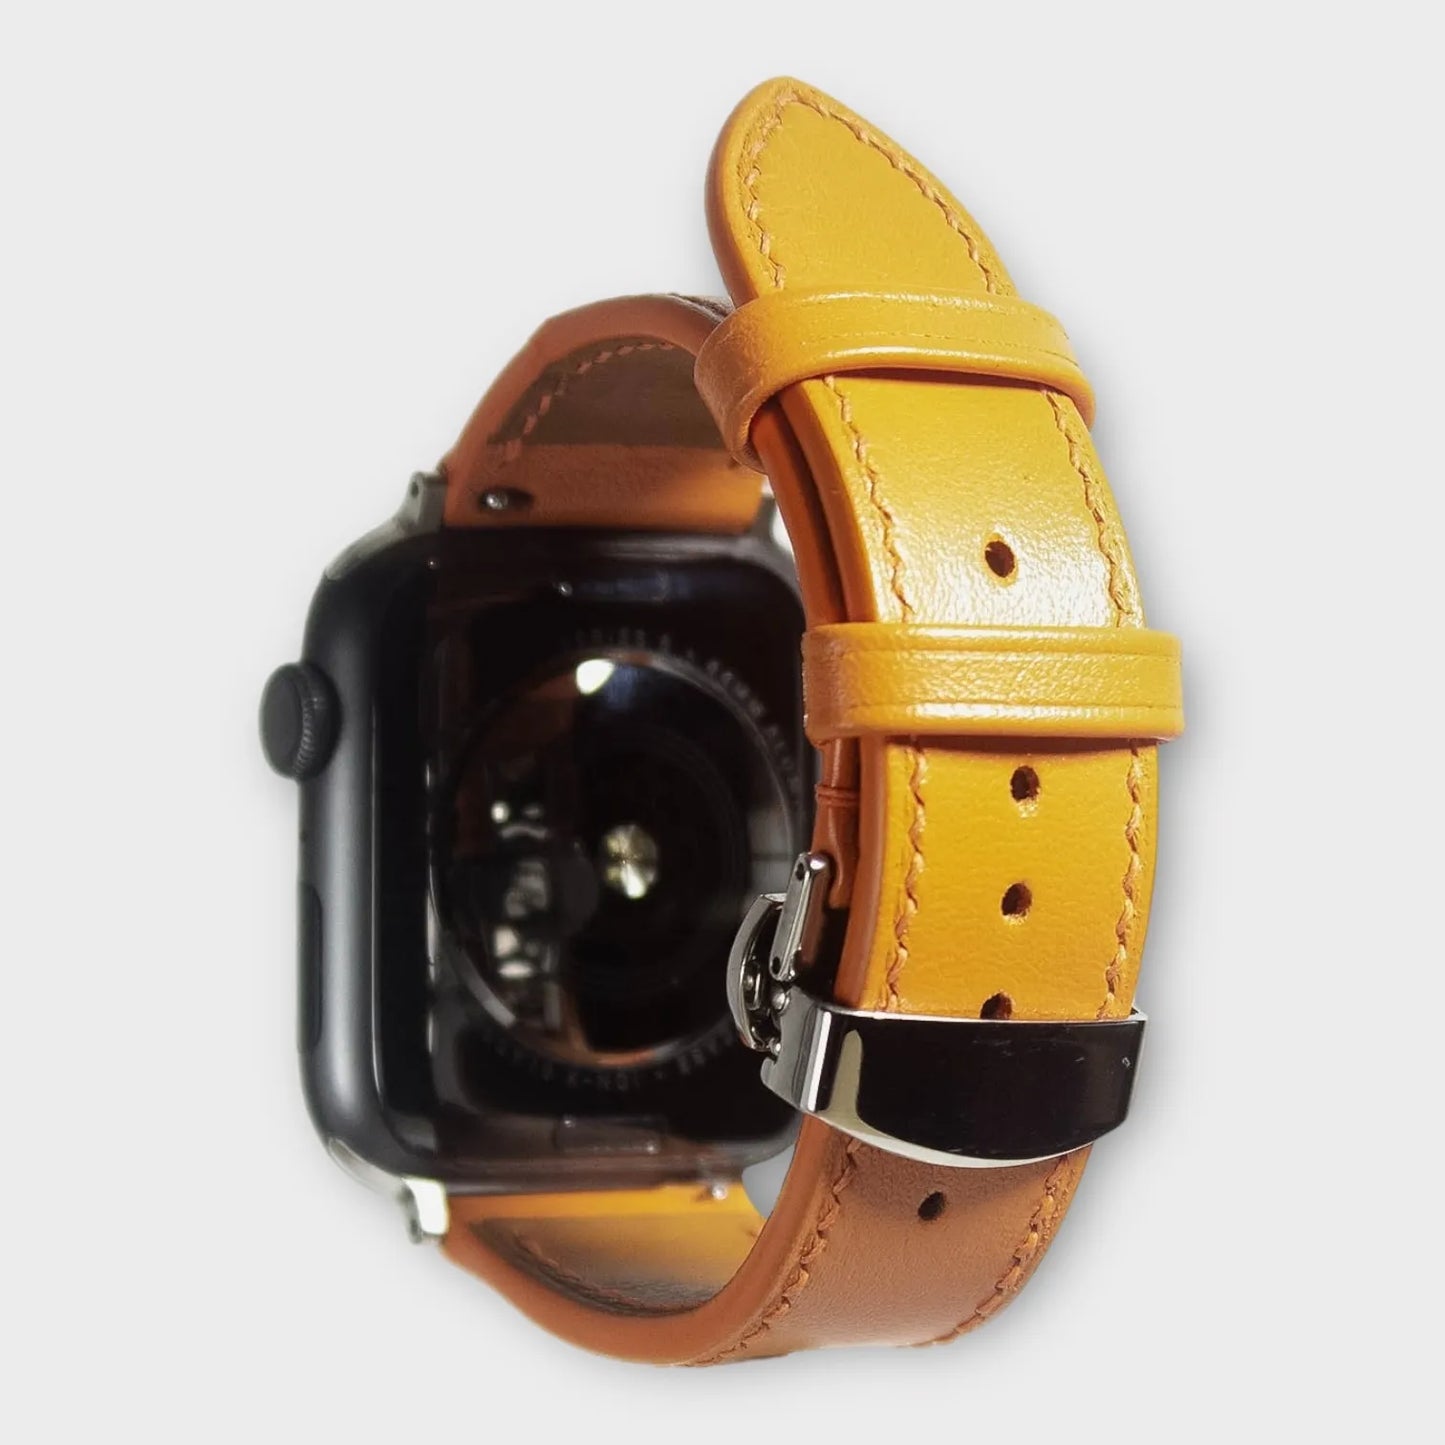 Apple watch bands in vibrant orange Swift leather, elegant and eye-catching for stylish wear.